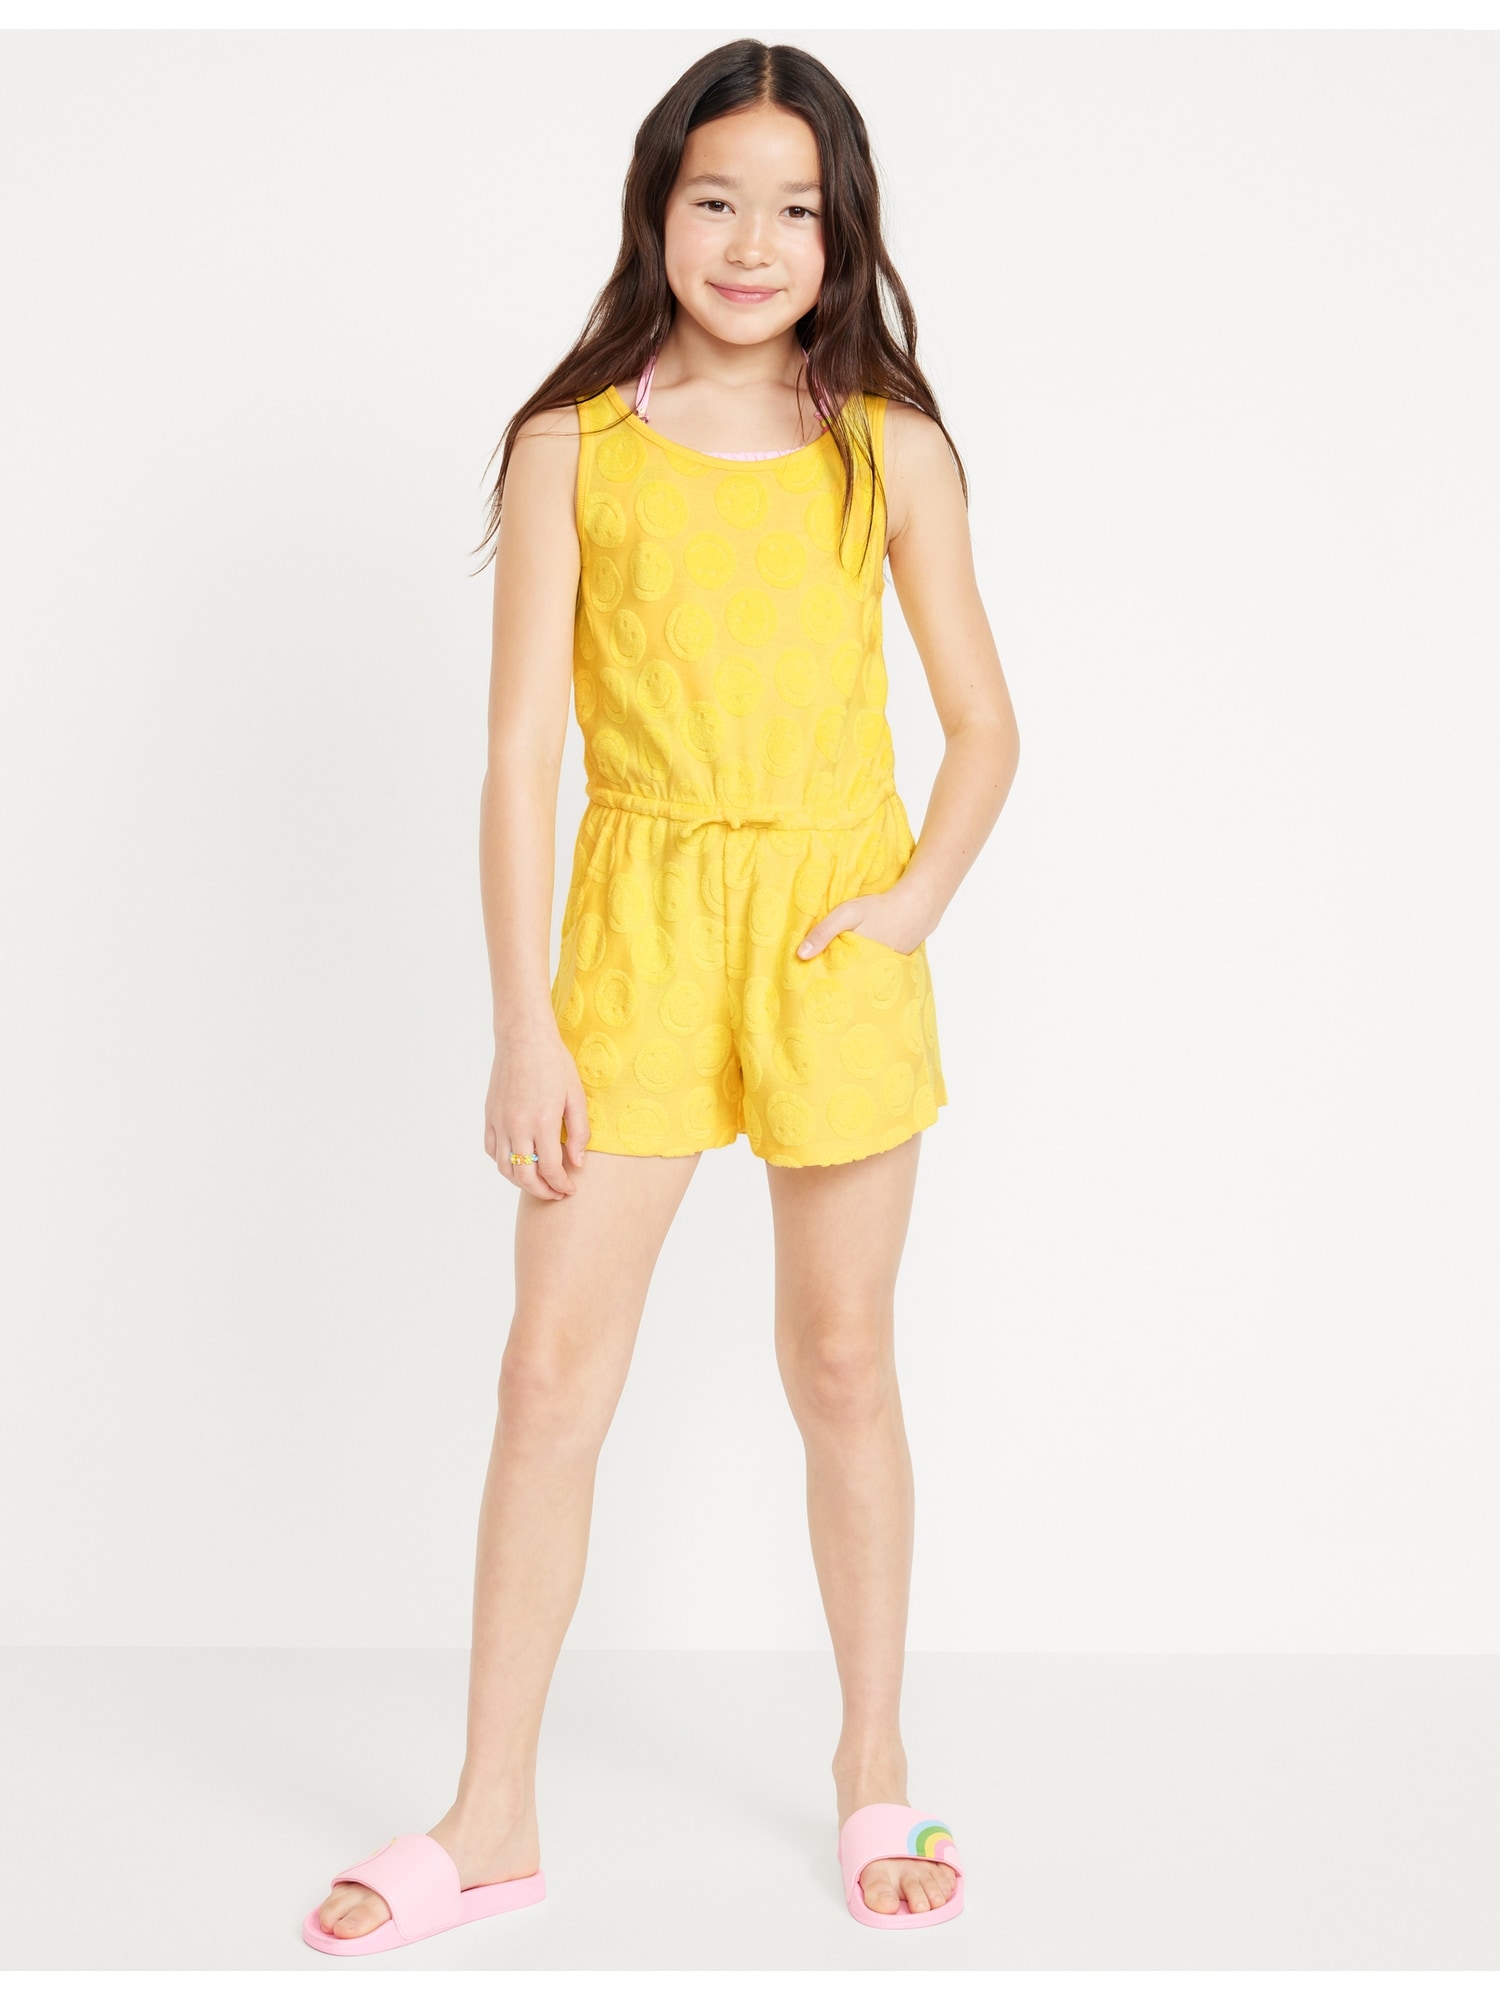 Sleeveless Terry Cinched-Waist Romper for Girls Hot Deal